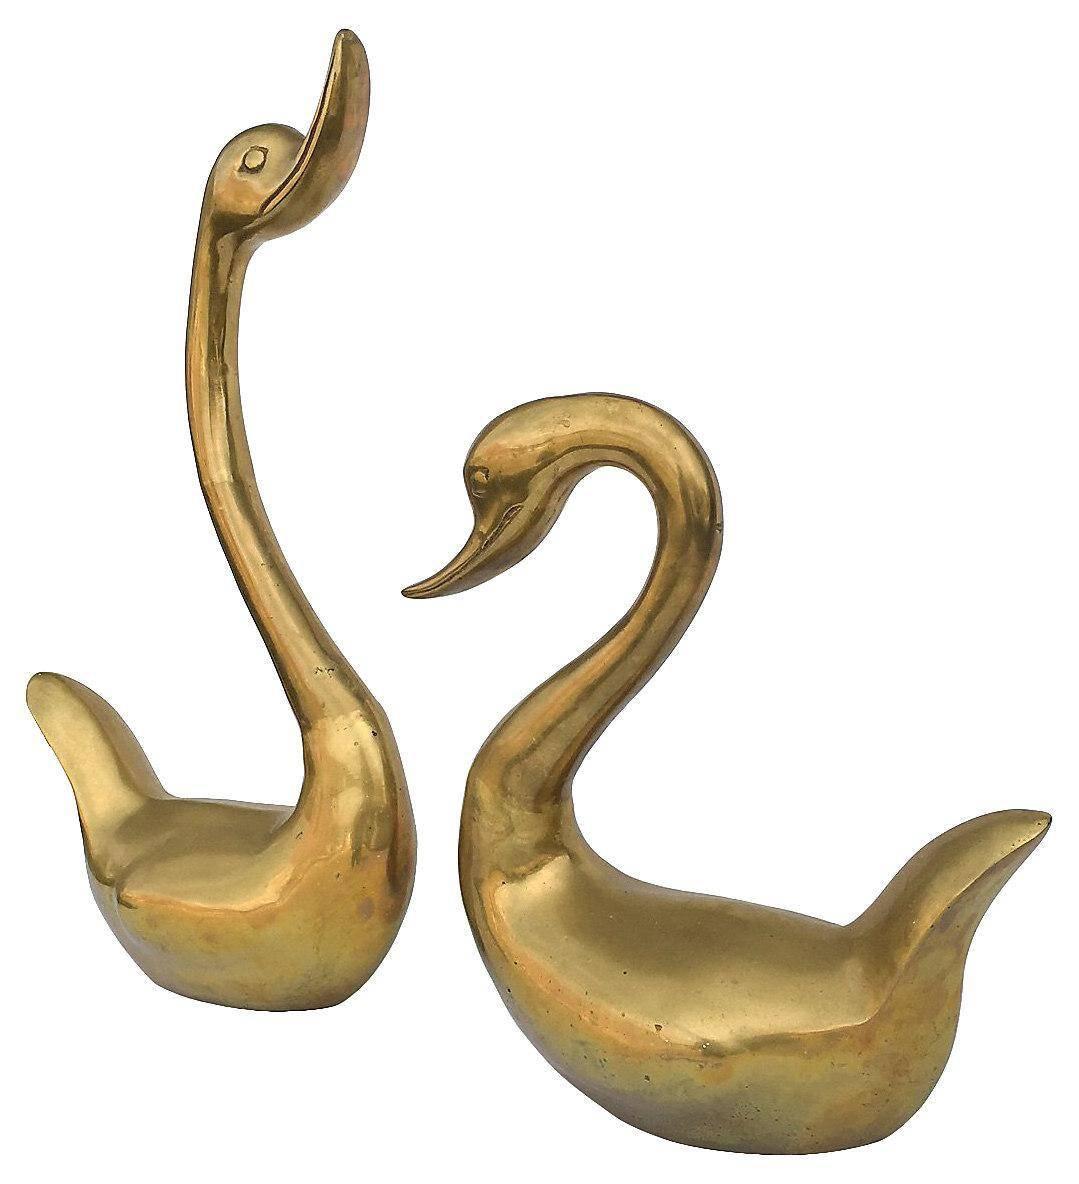 Offered is a beautiful, pair of over-scale Midcentury solid brass swans. They have no maker's mark. There is a light patina on each of them.

They are in two different sizes: Swan with raised neck, 19" H x 11" L x 5.5" W; swan with